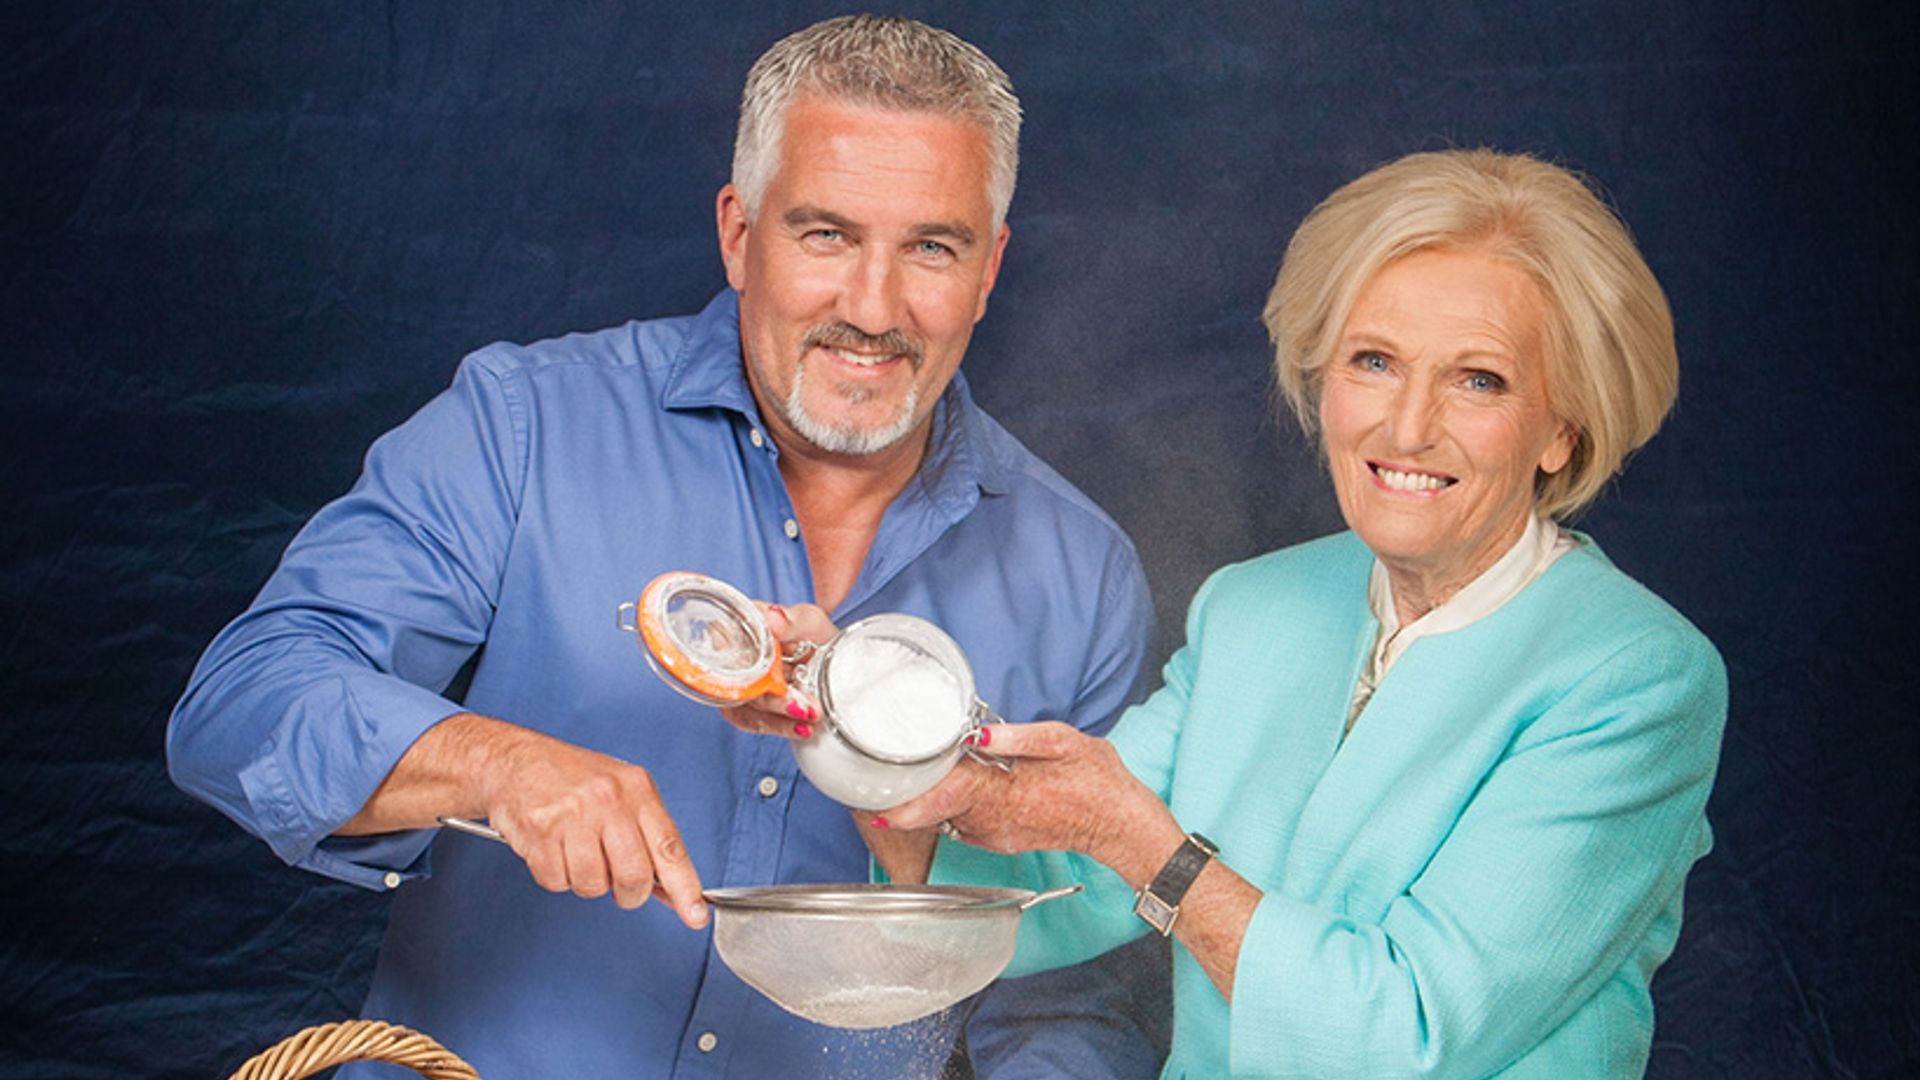 Mary Berry breaks silence on Paul Hollywood's Great British Bake Off move